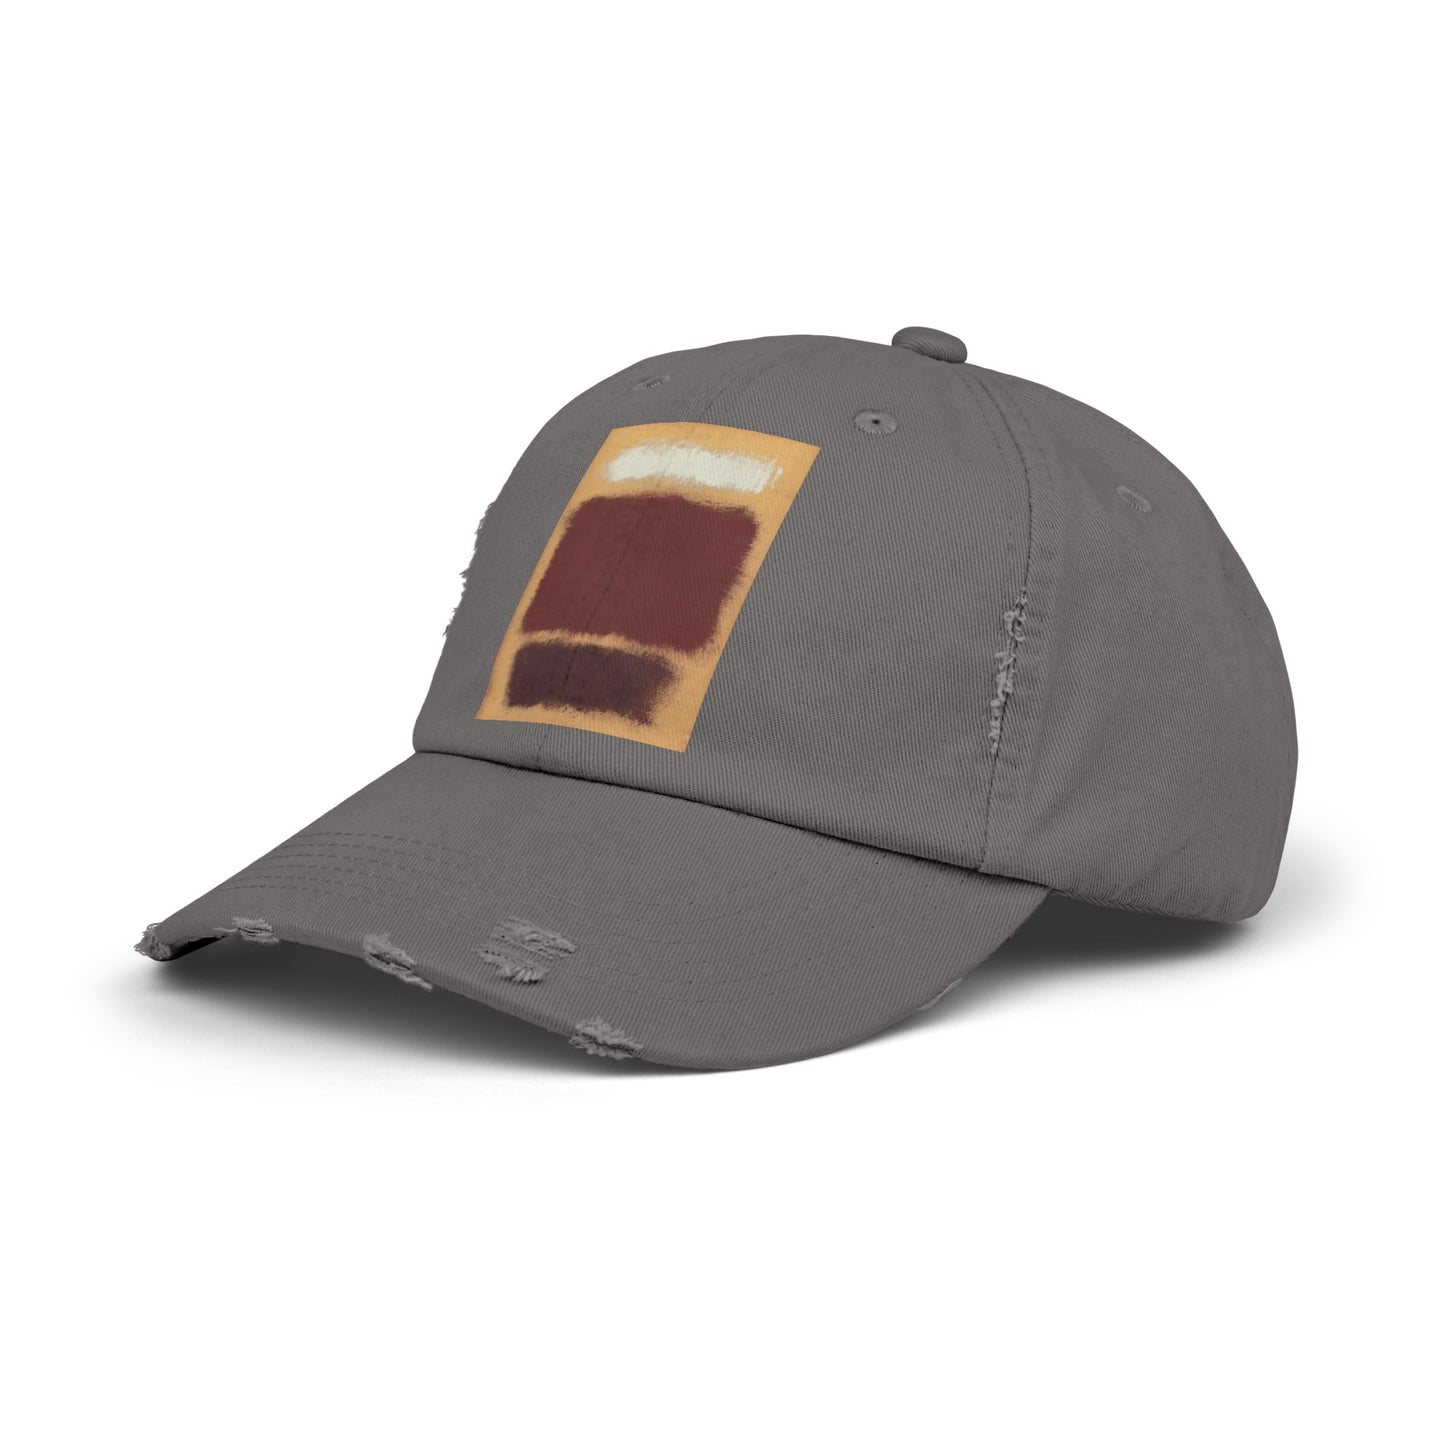 a gray hat with a brown patch on it